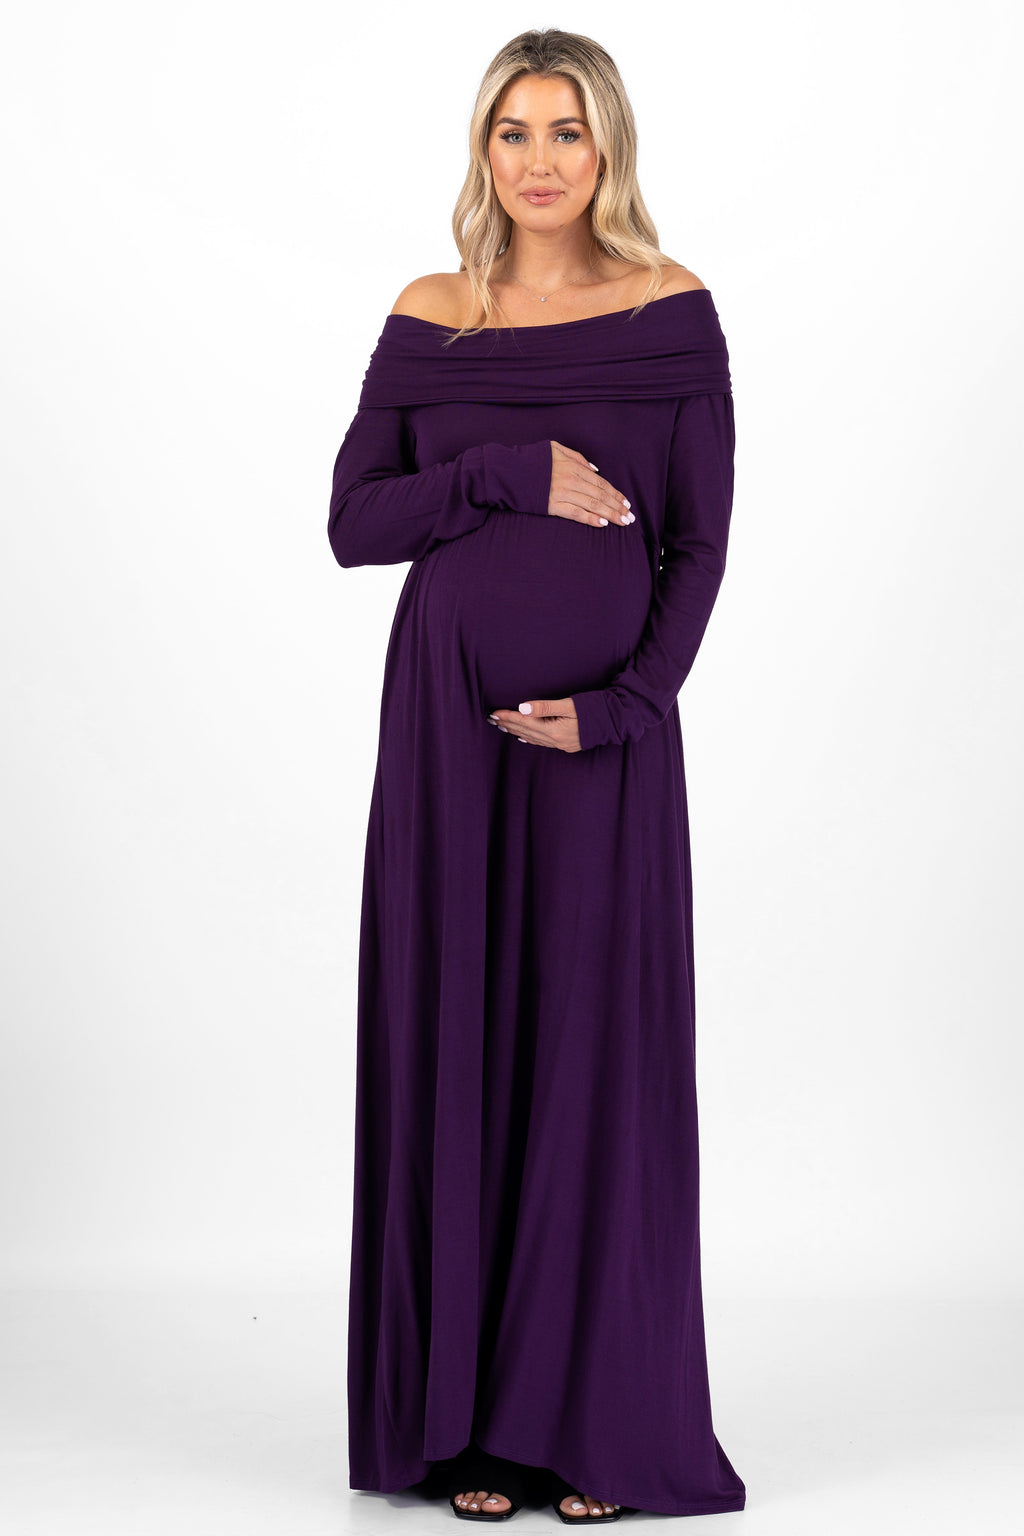 Off Shoulder Maternity Gown and Photoshoot Dress